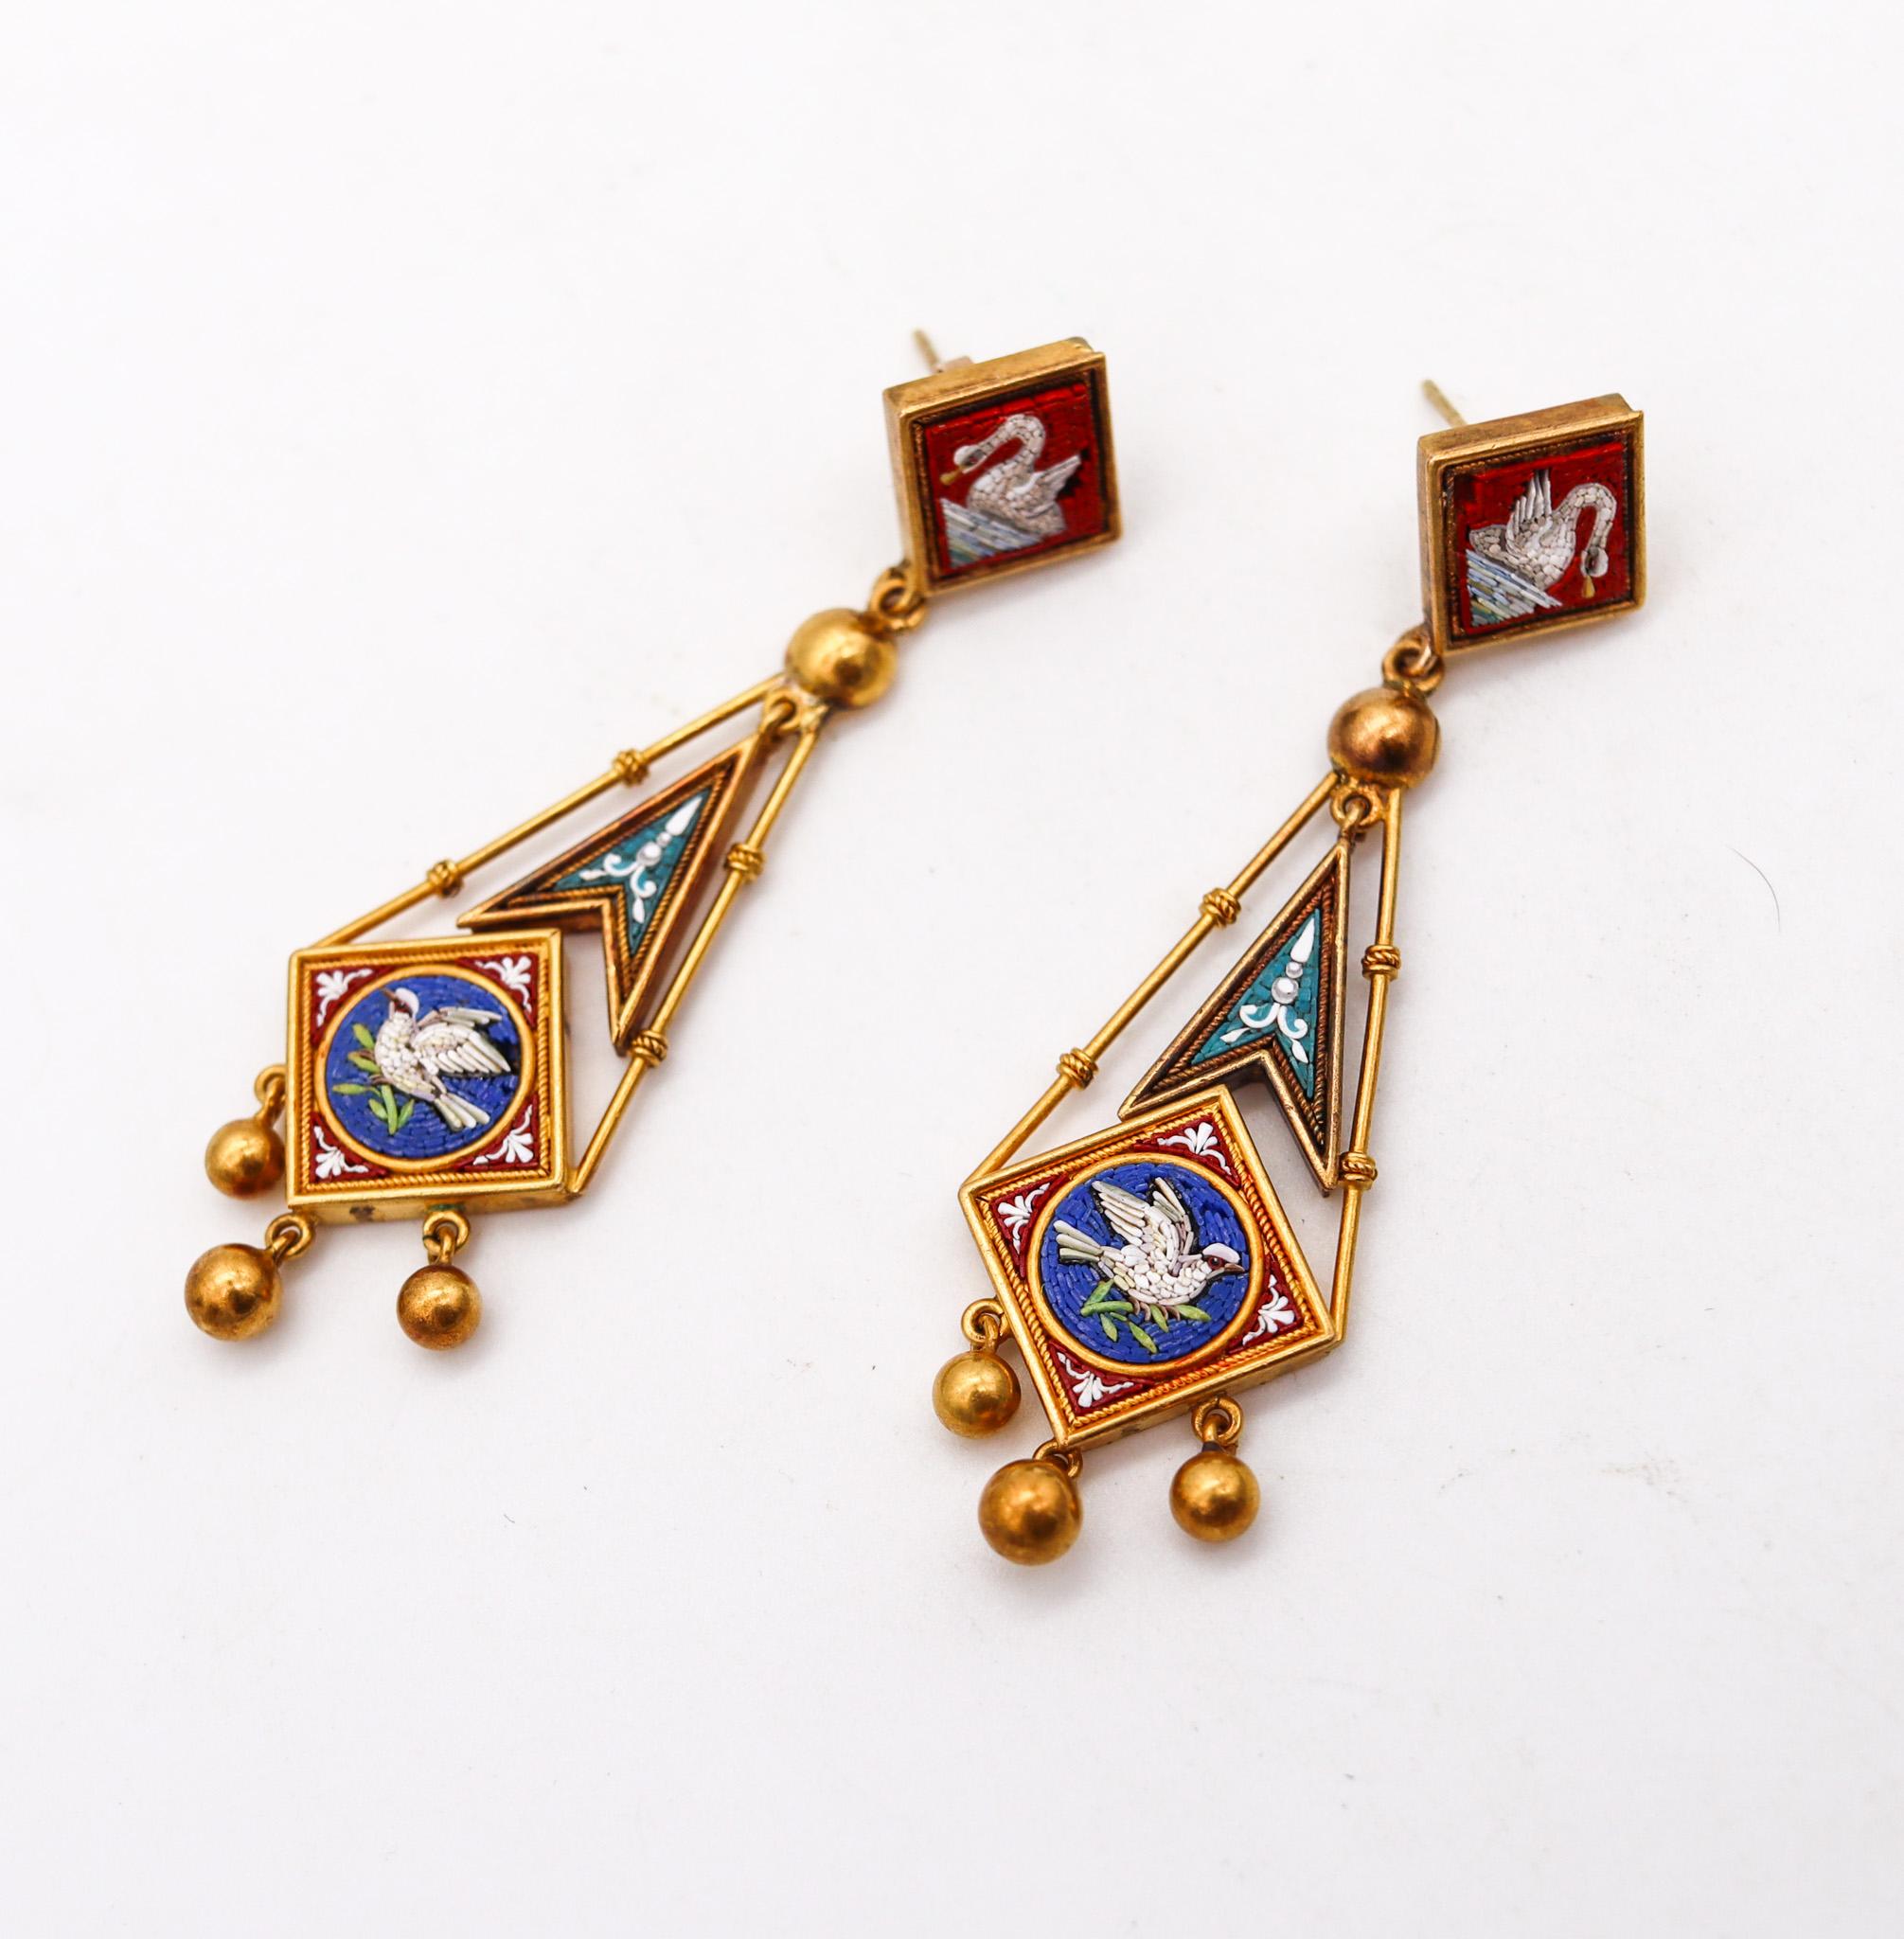 Roman revival grand tour earrings with Swan.

Beautiful historical piece created during the Victorian Grand Tour era, at the Papal States in Rome Italy, back in the 1850. This rare pair of dangle drop earrings was carefully crafted with Roman and